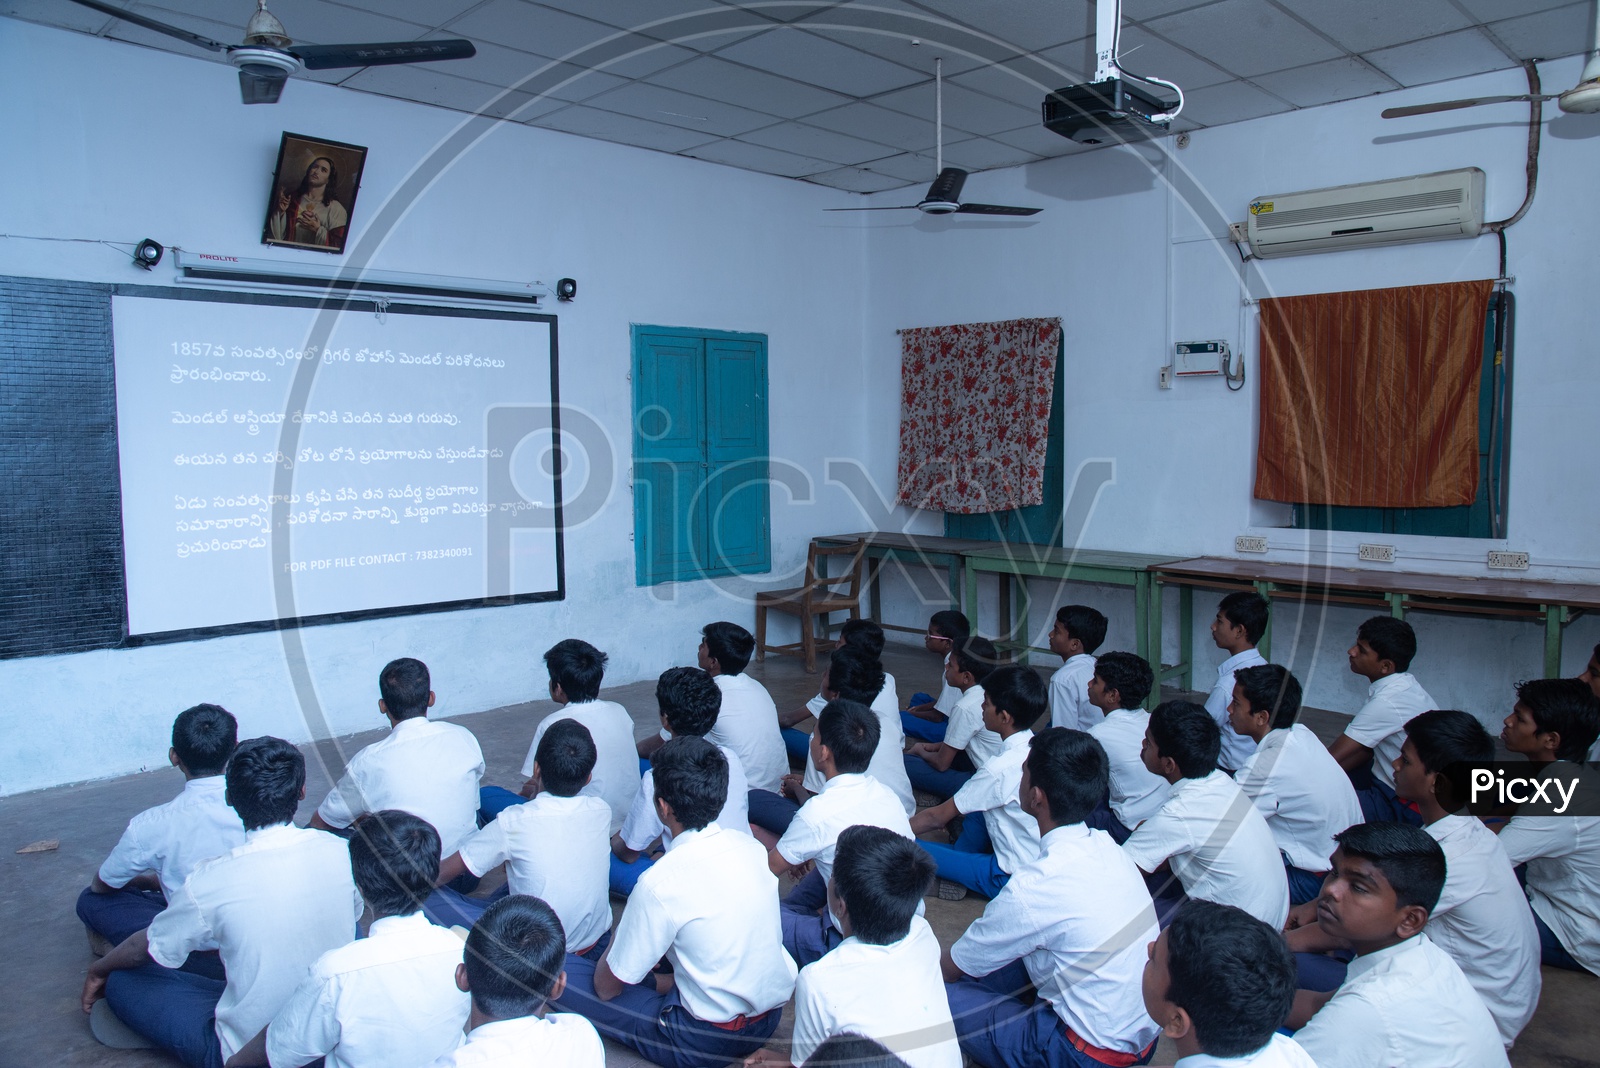 Students in a digital classroom